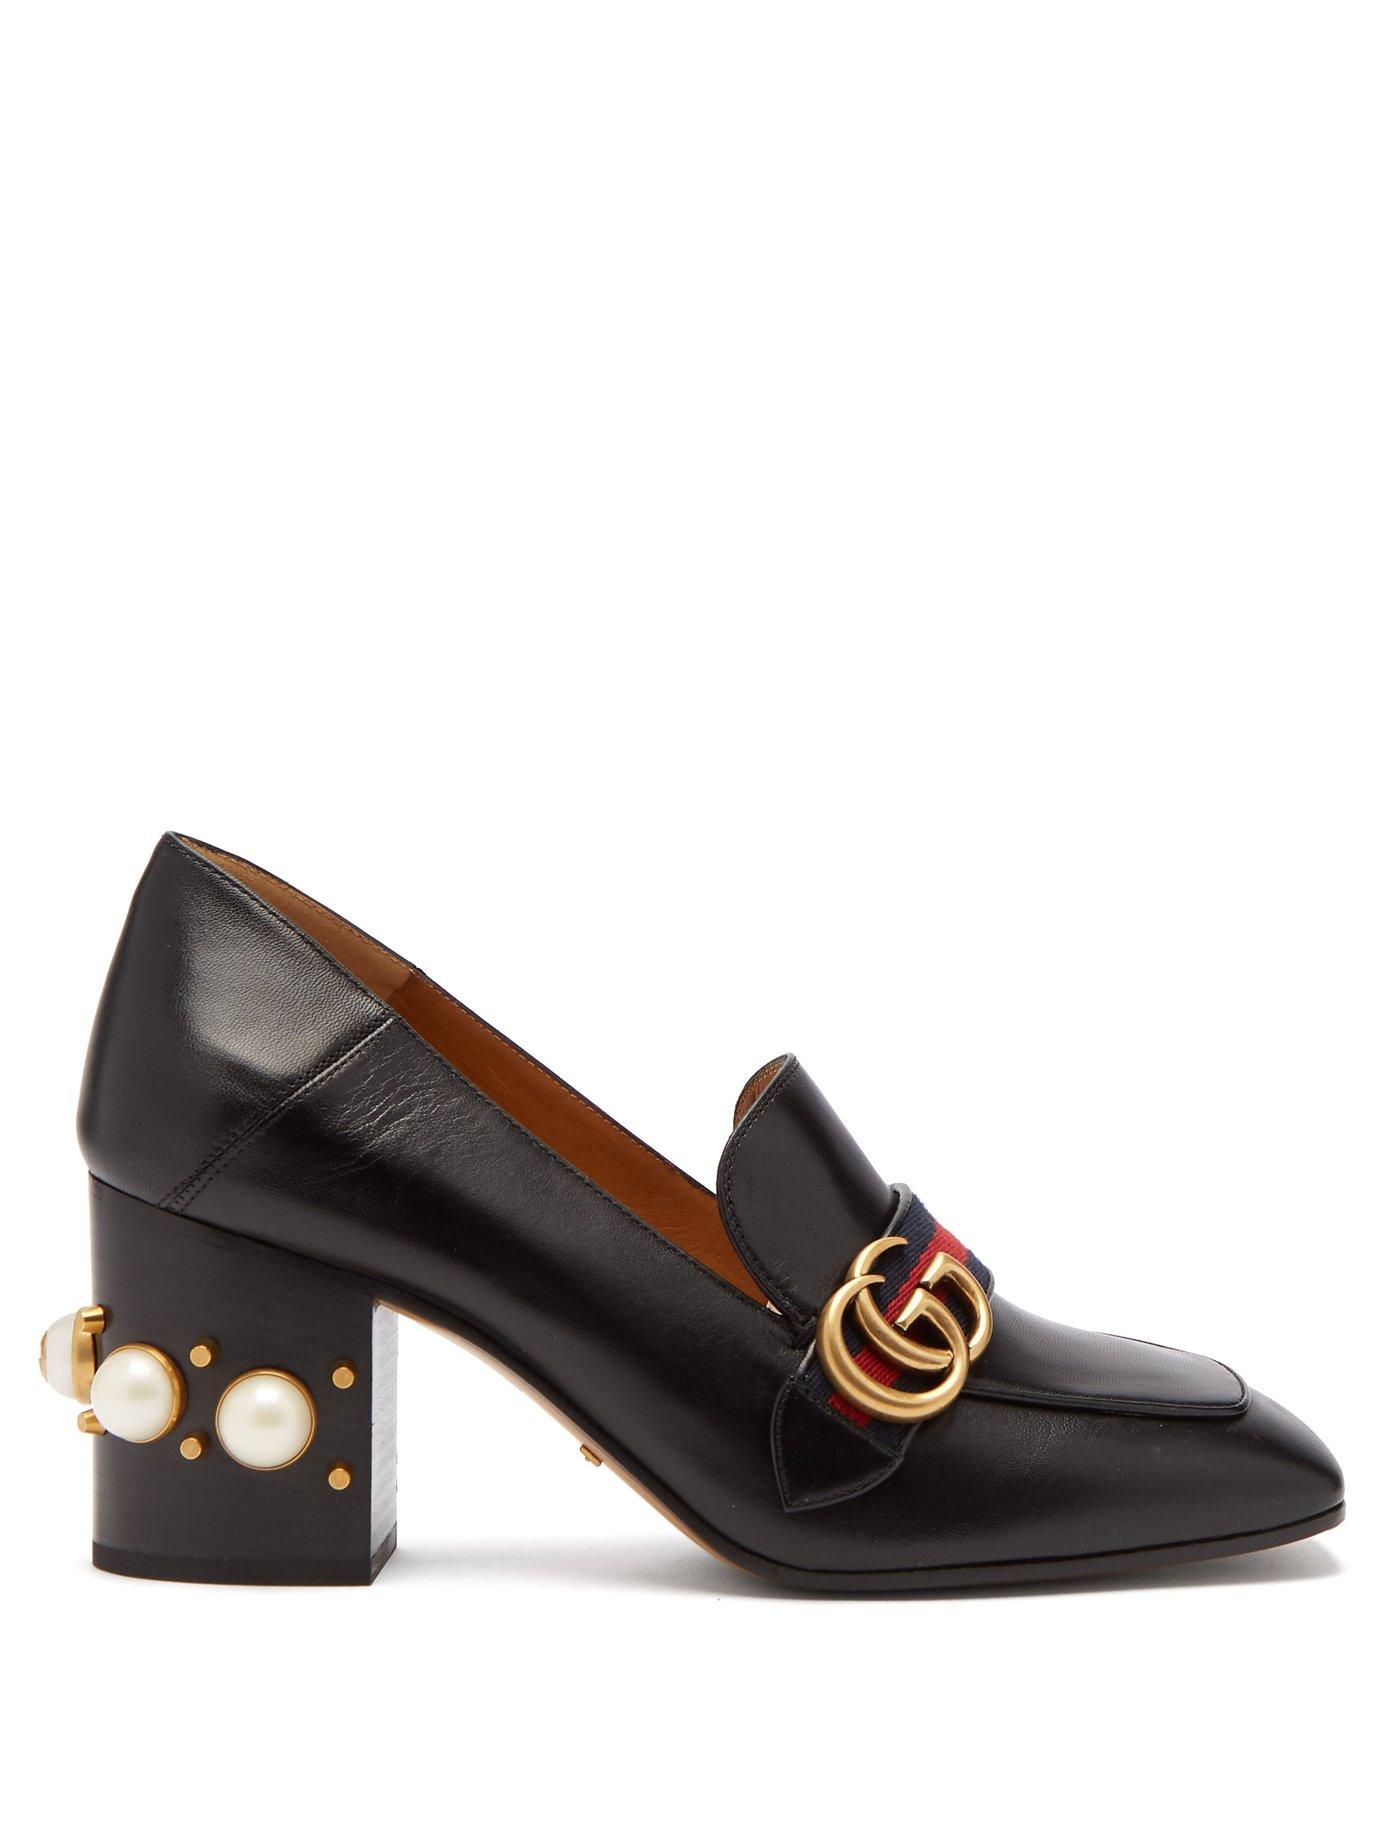 Gucci Peyton Embellished Leather Loafers in Black - Save 23% - Lyst